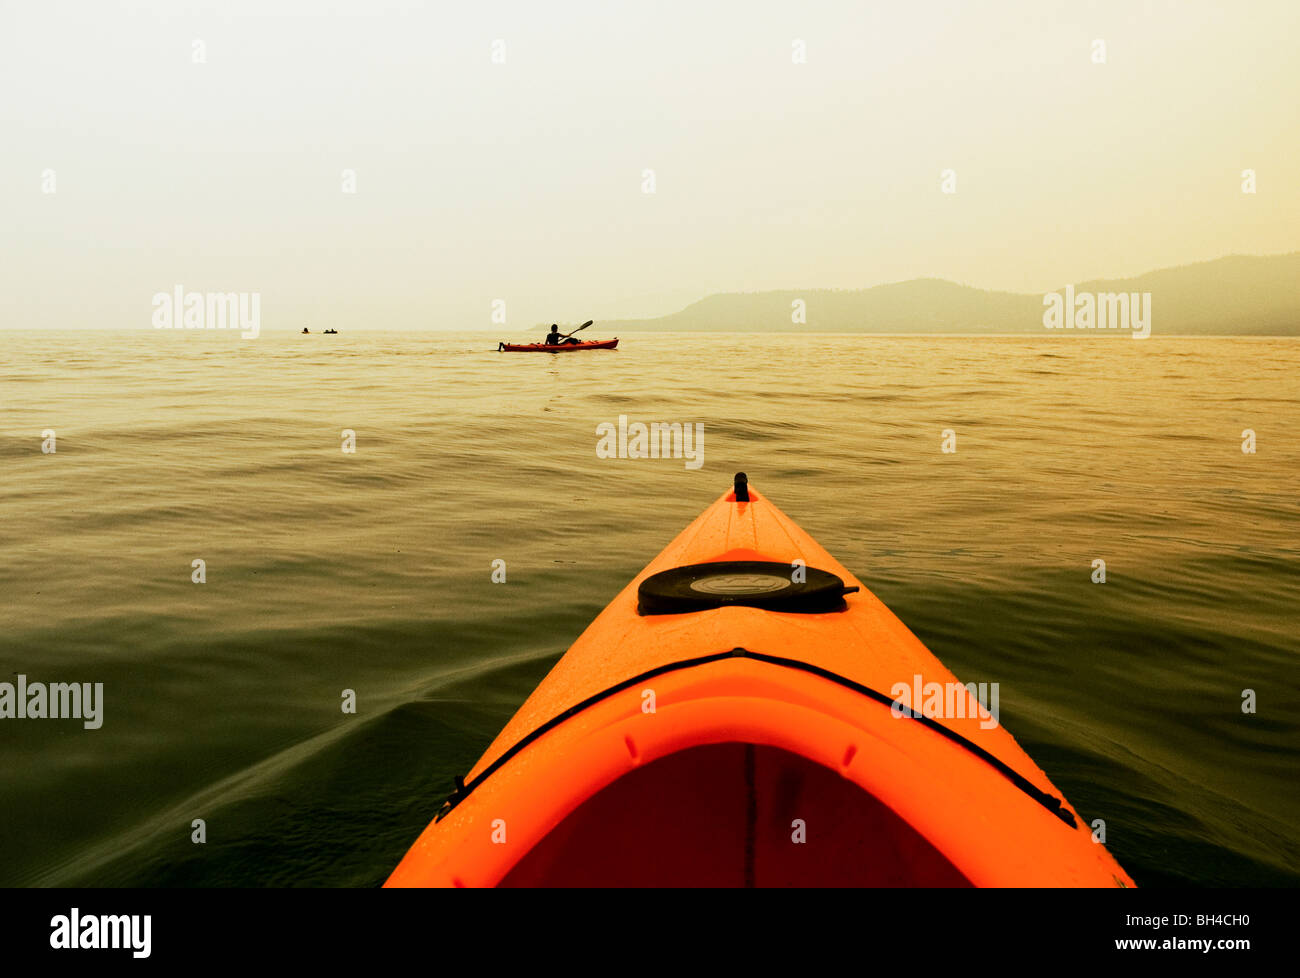 The view of a person kayaking on the lake during a smoky afternoon, in Lake Tahoe, Nevada. Stock Photo